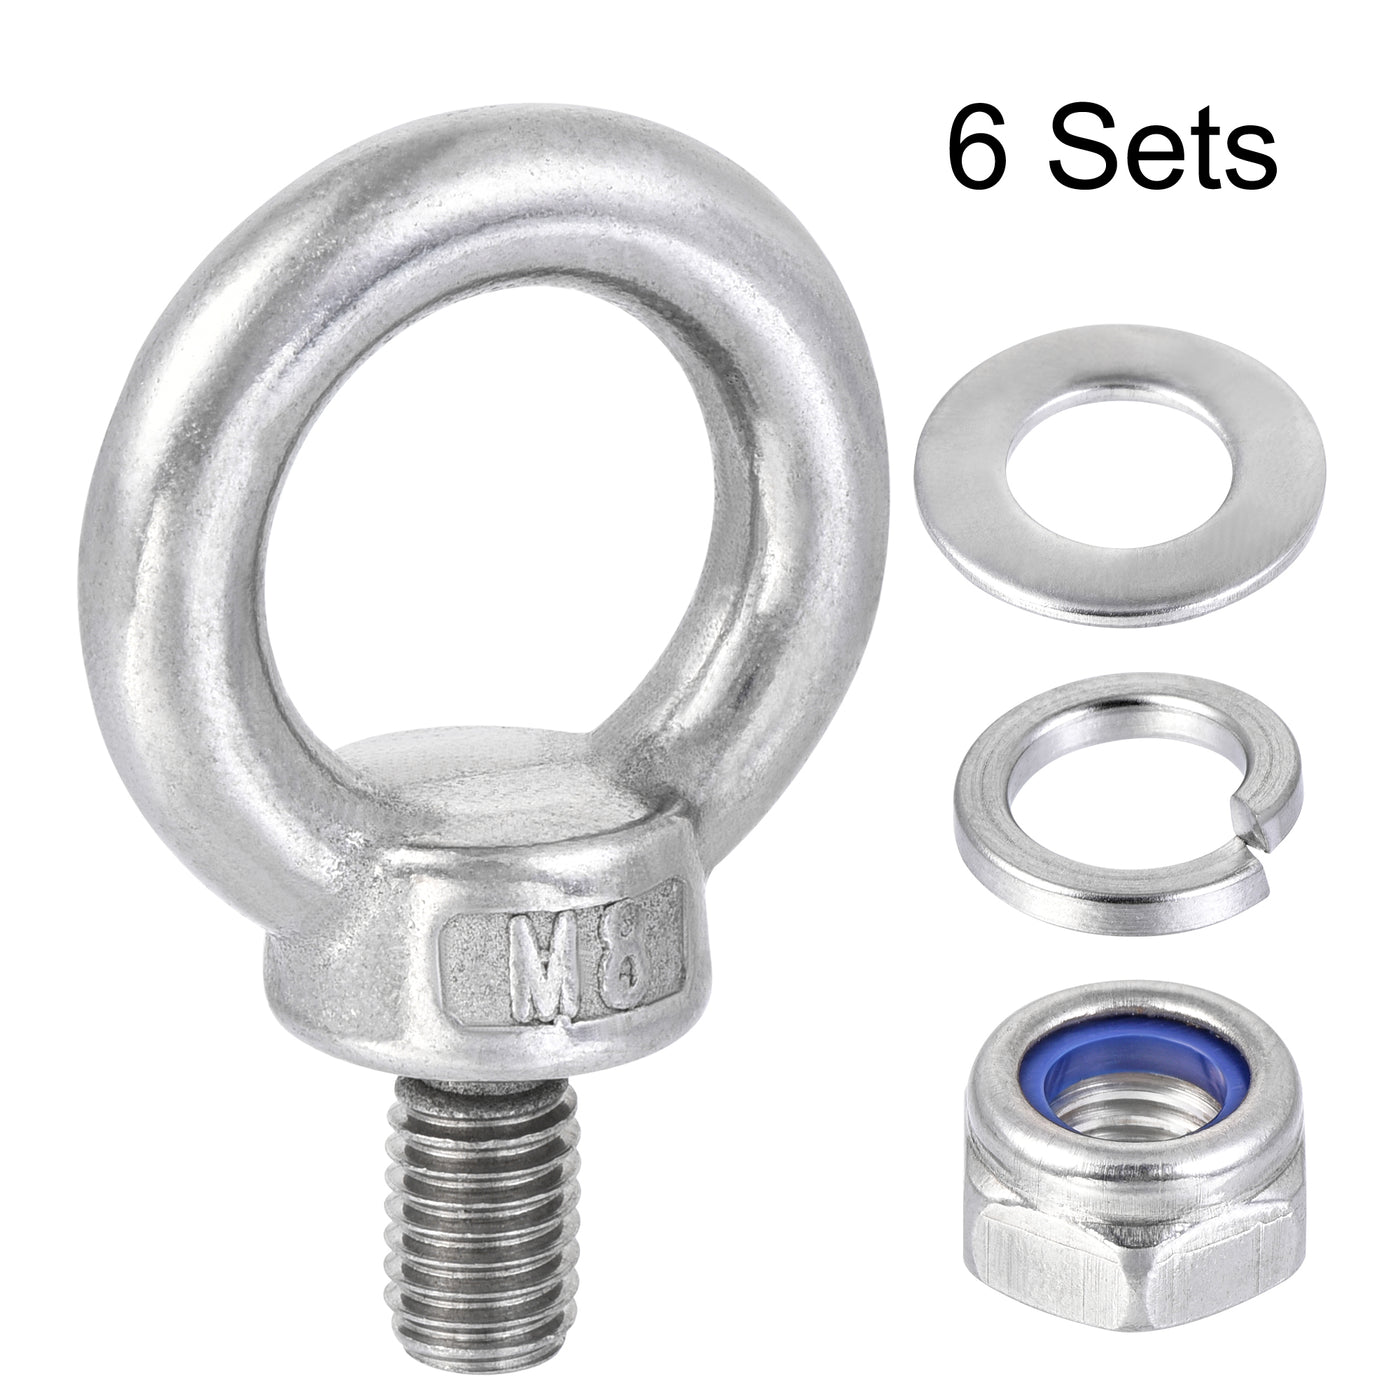 uxcell Uxcell Lifting Eye Bolt M8 x 14mm Male Thread with Hex Screw Nut Gasket Flat Washer for Hanging, 304 Stainless Steel, 6 Sets